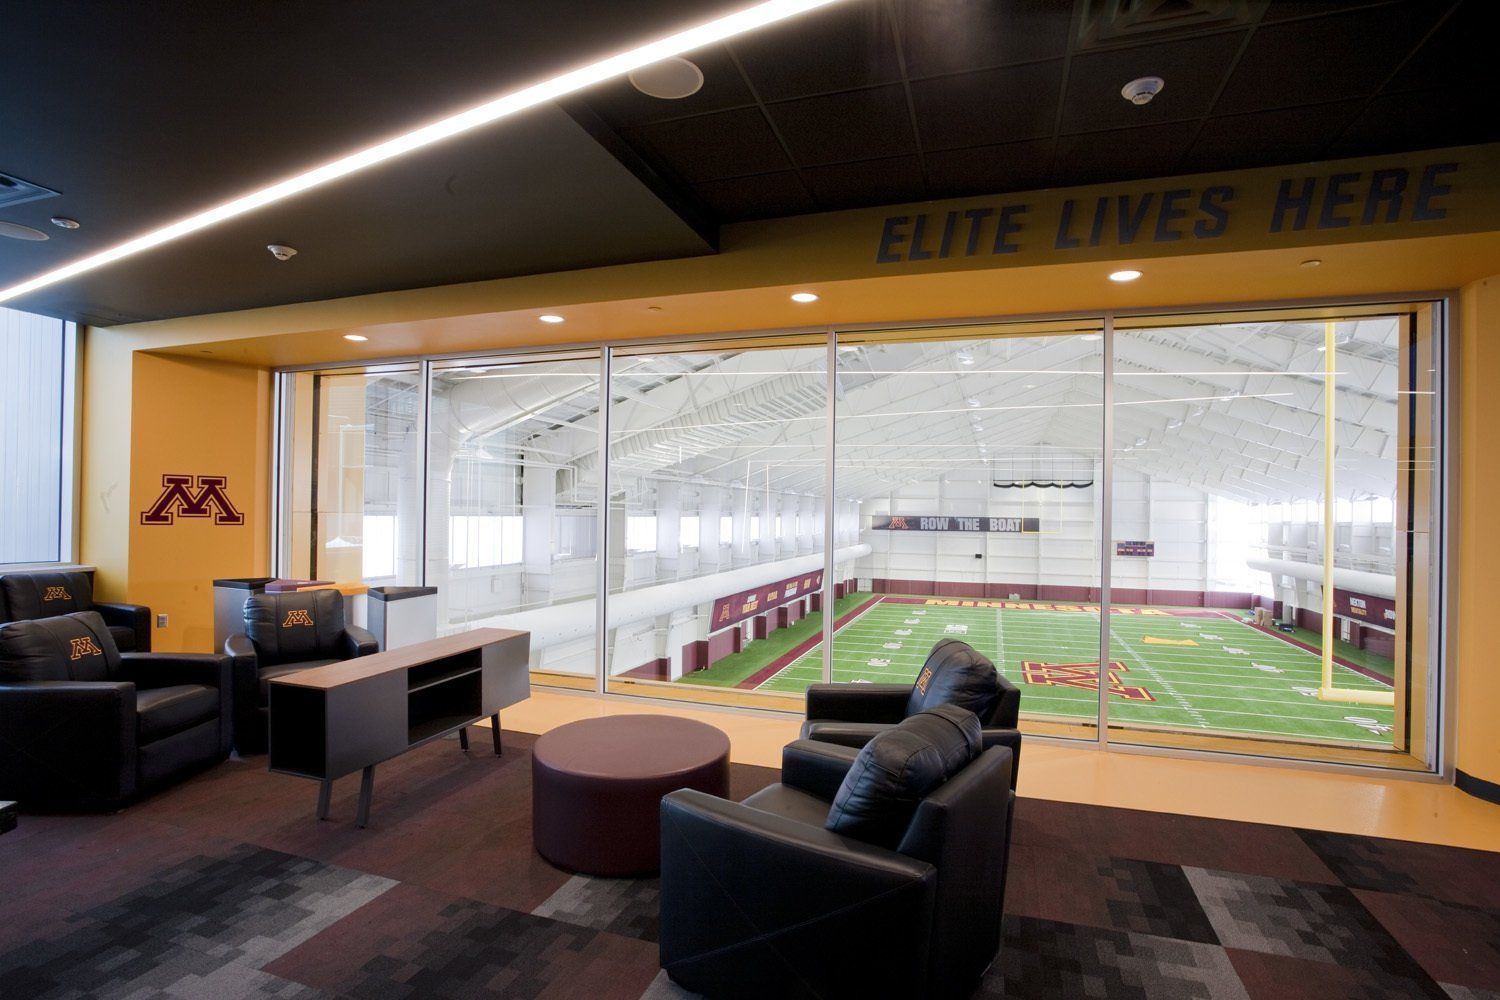 A living room with a view of a football field and a sign that says elite lives here